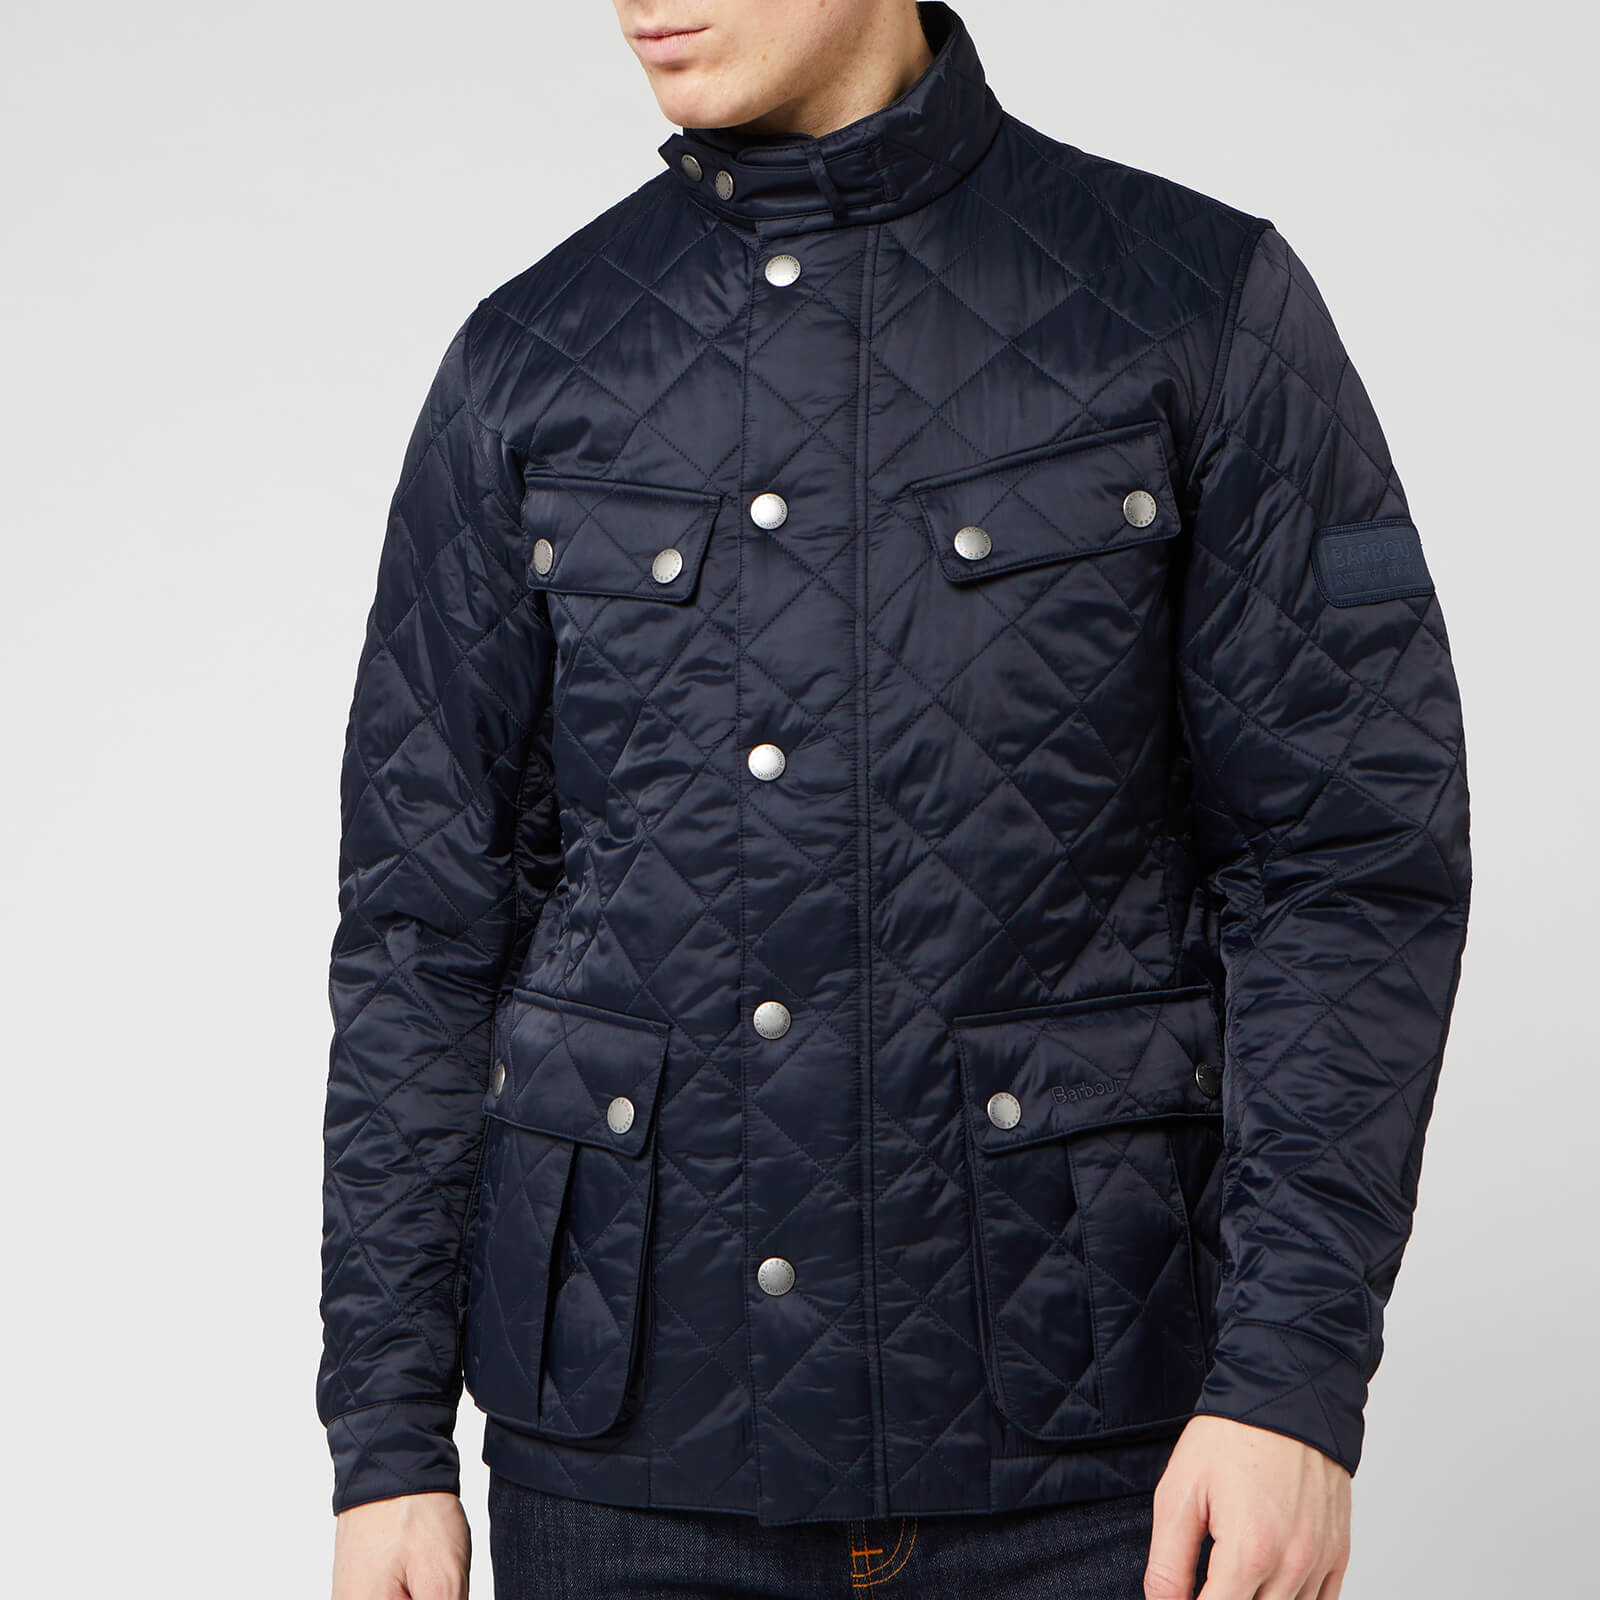 Куртка barbour мужская. Barbour International мужские. Barbour International куртка мужская. Barbour International Ariel Quilted Jackets Olive. Barbour 26697 International Jacket.